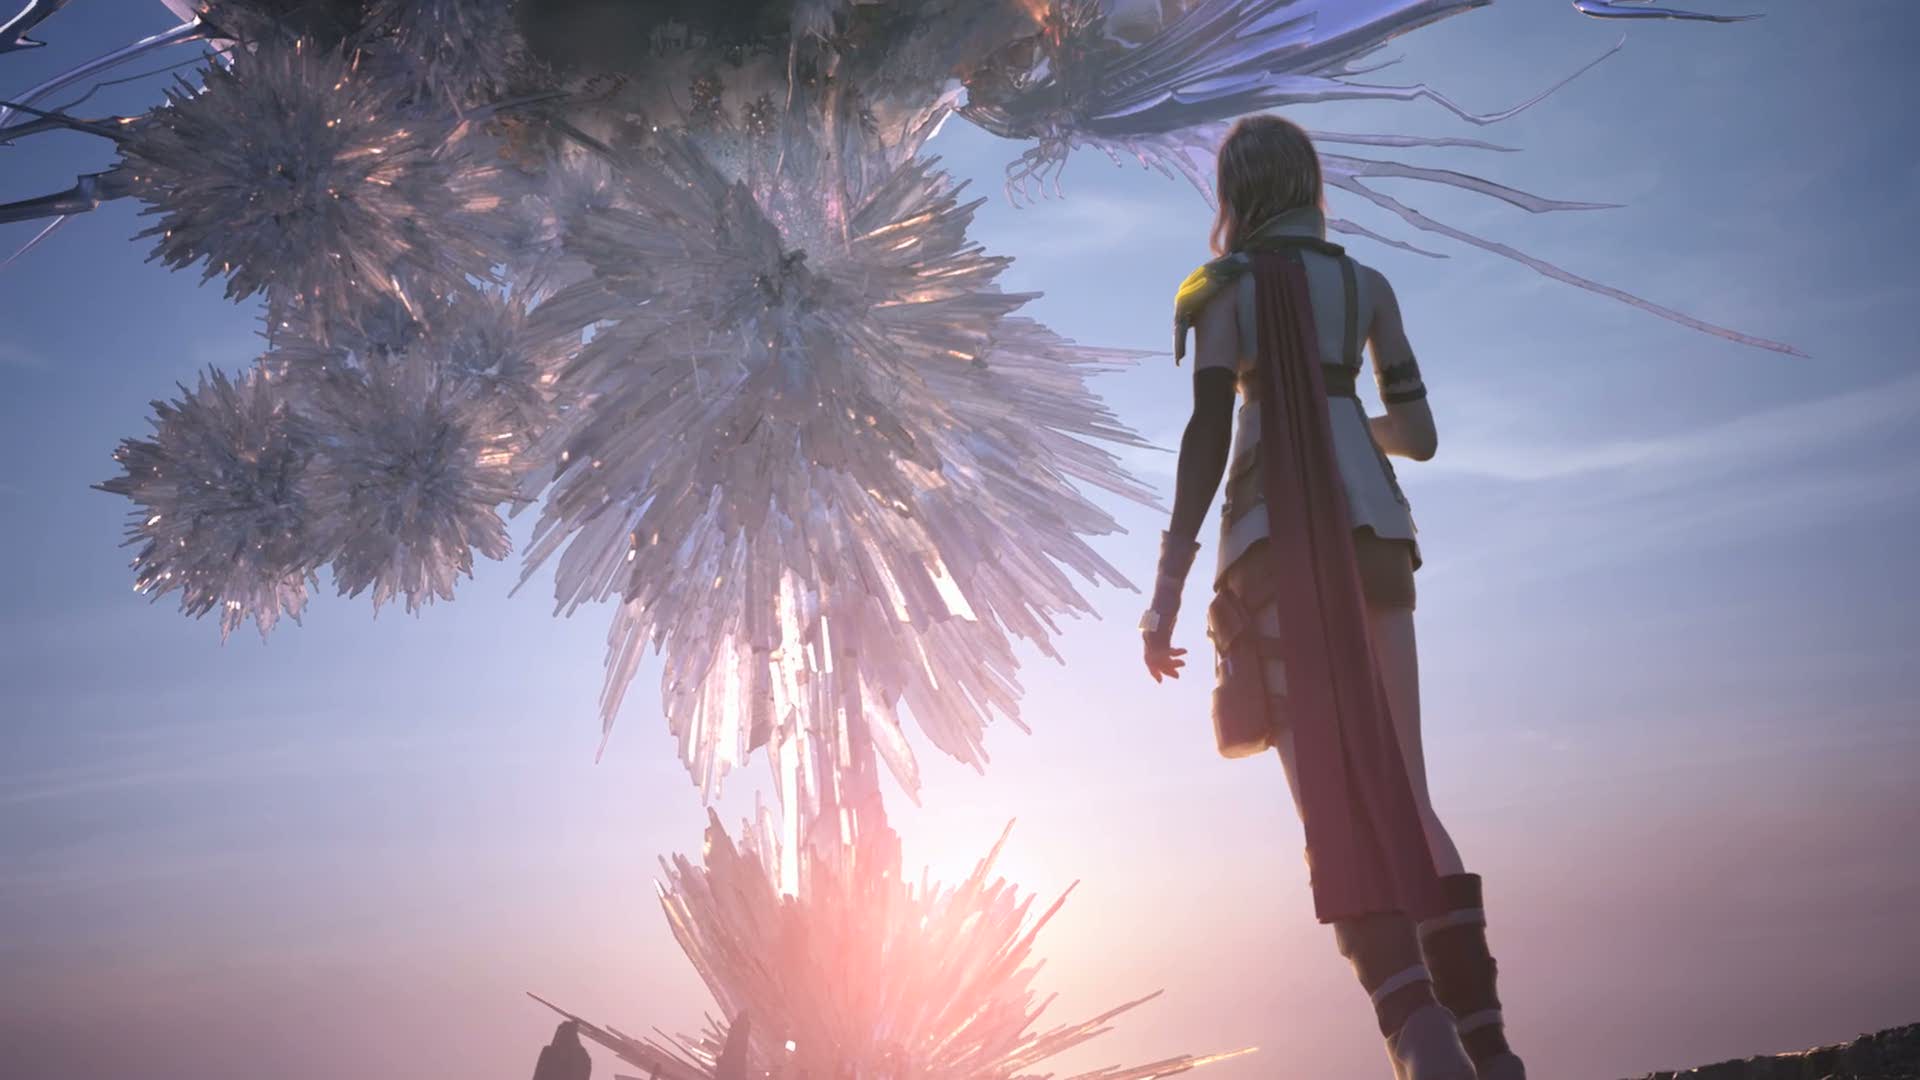 Final Fantasy Xiii Wallpapers 1080p 17118 HD Wallpapers